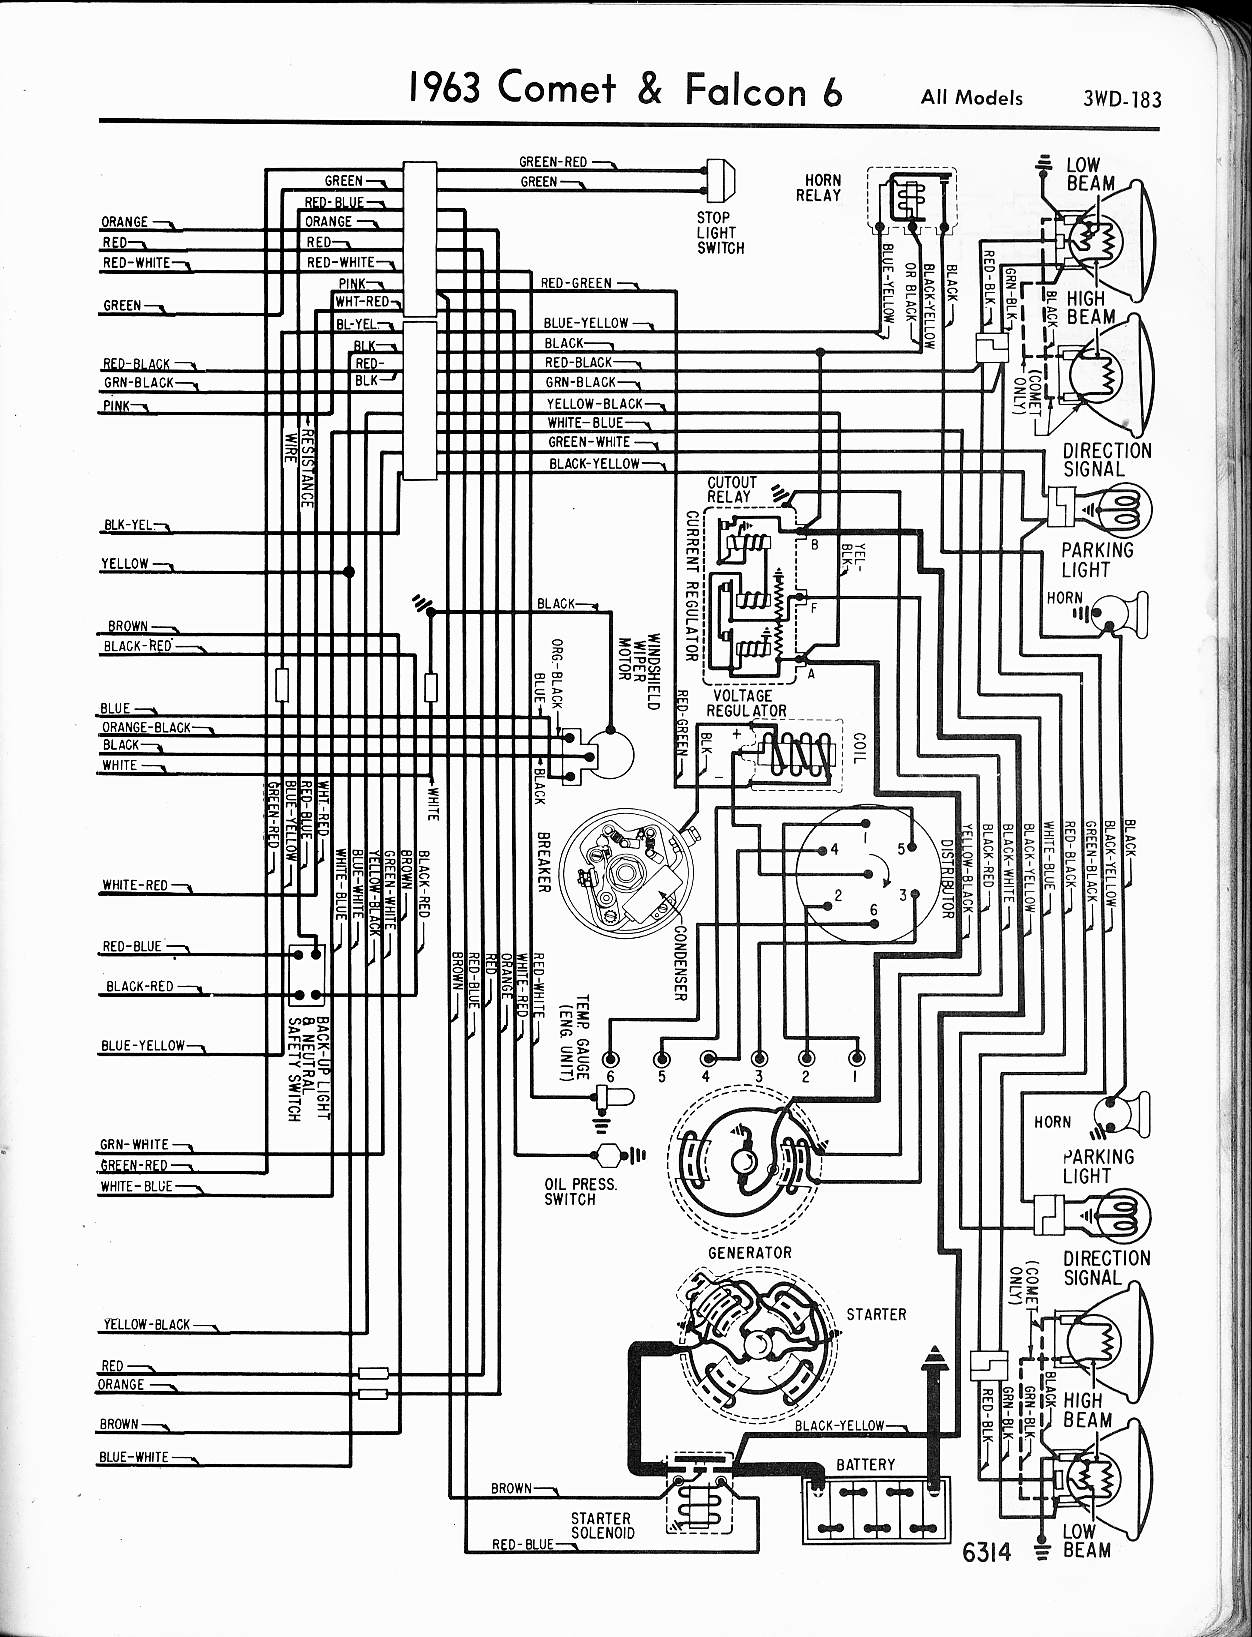 1963 Ranchero wiring diagram, anyone got one? - Ford Muscle Forums